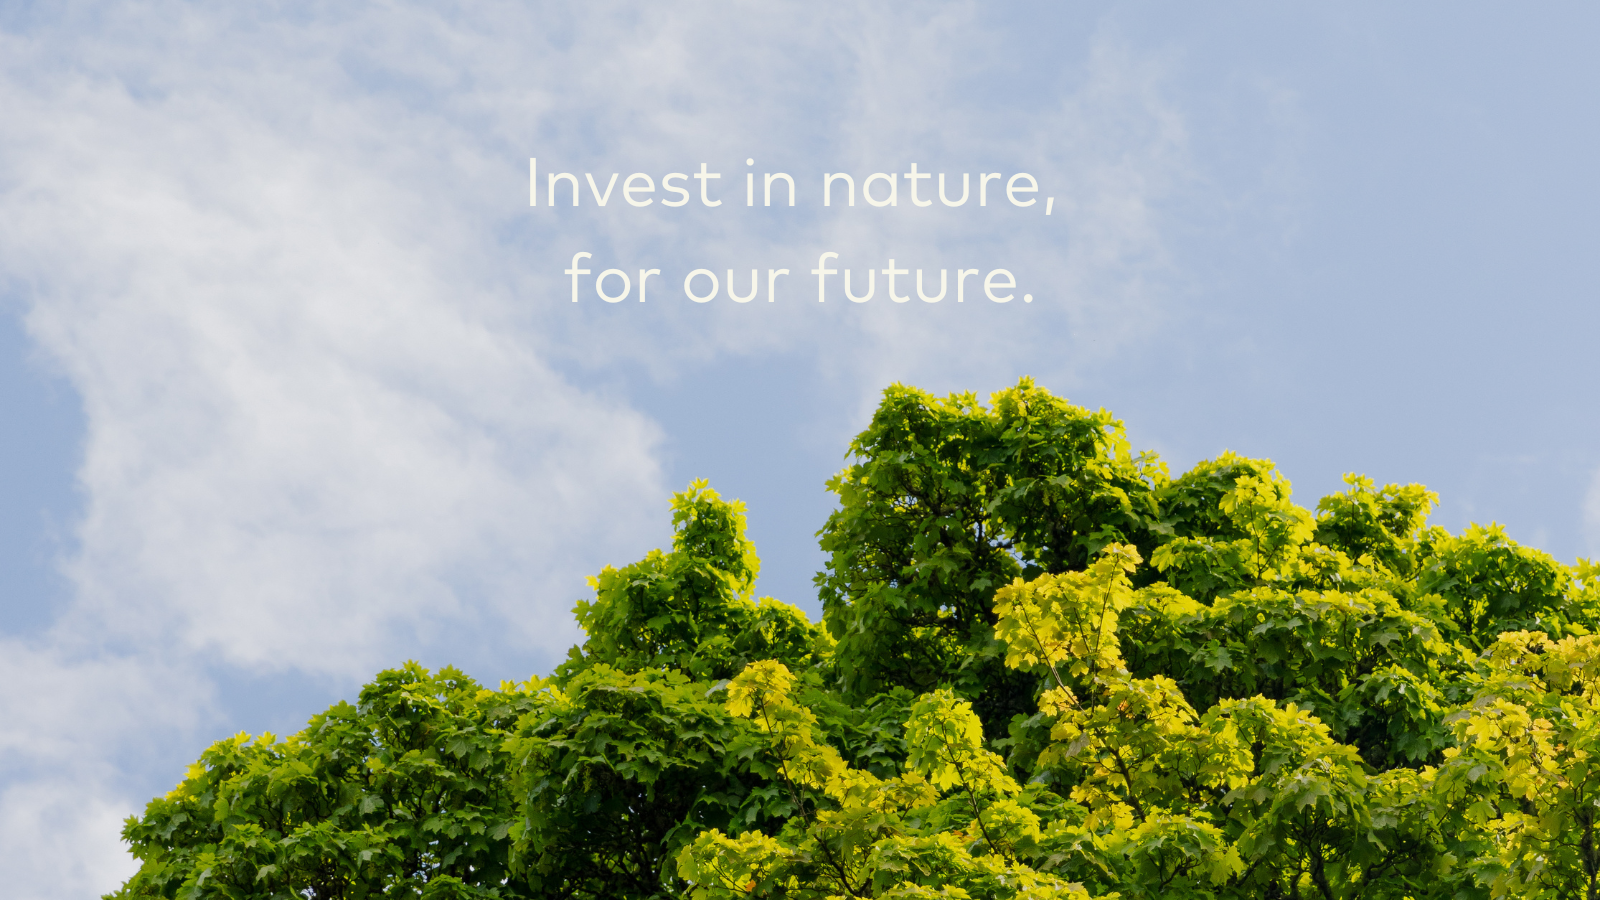 Invest in nature, for our future